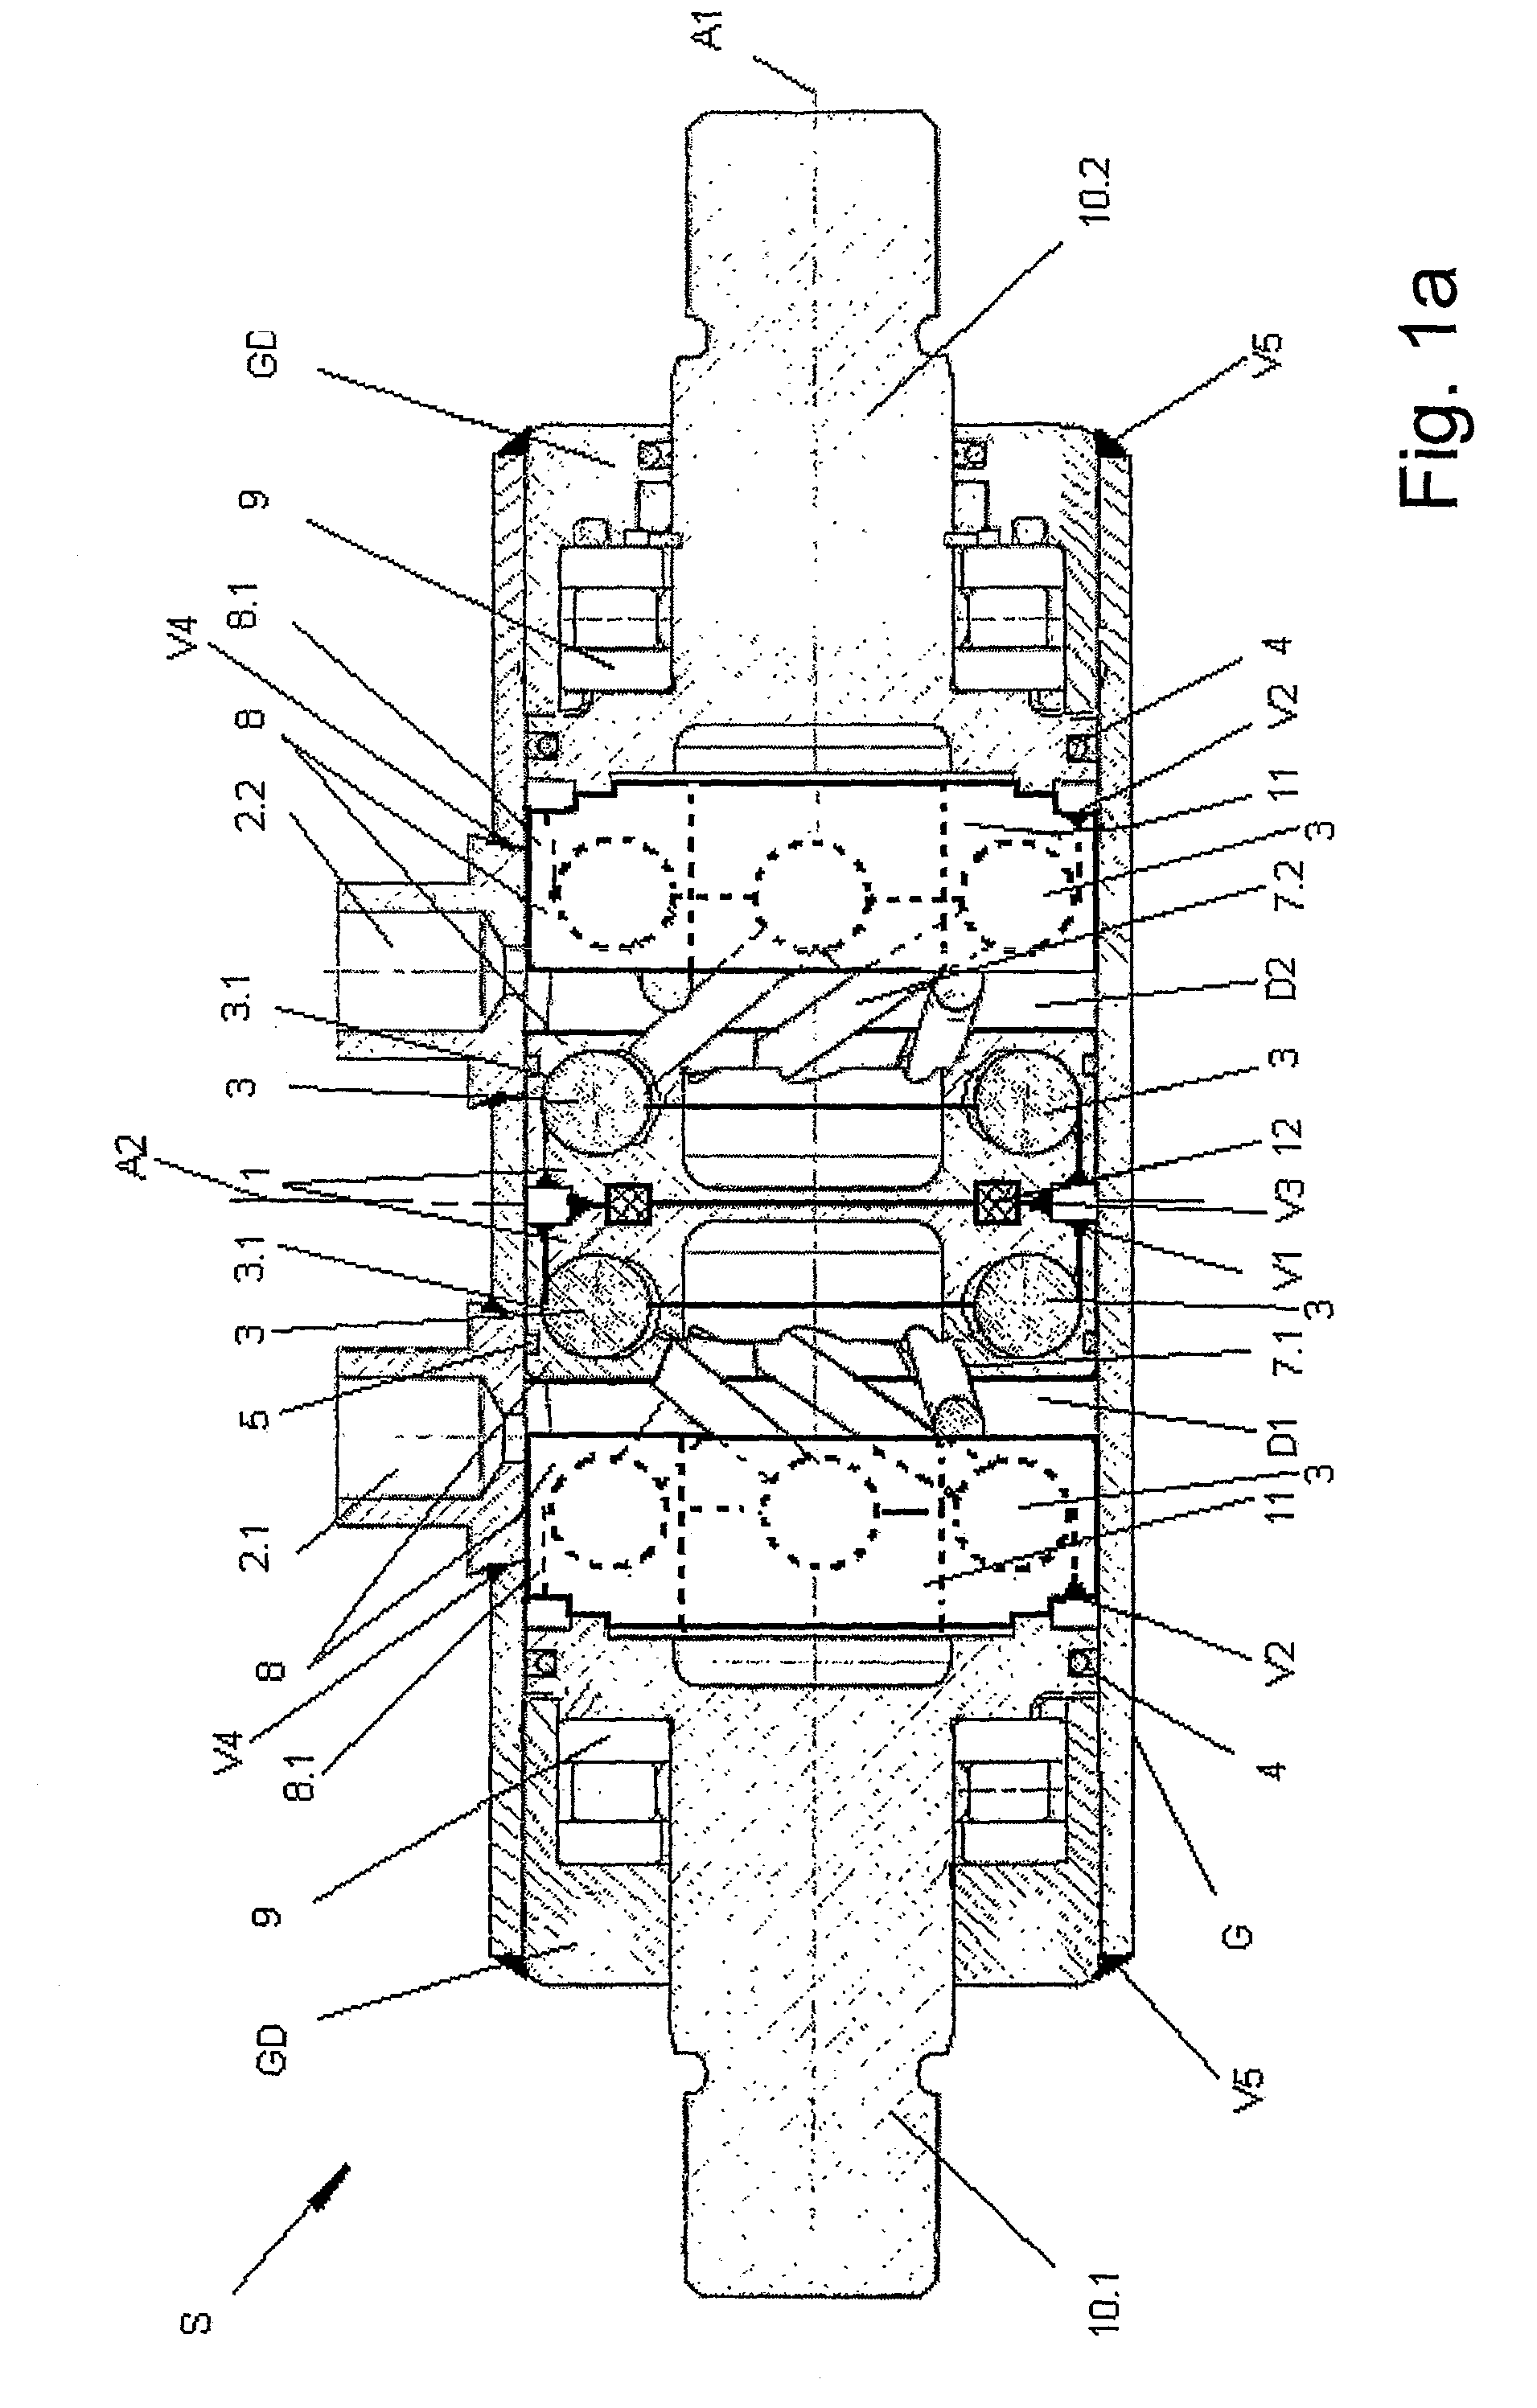 Apparatus for compensating and/or transmitting forces or torques and rotational movements between two components